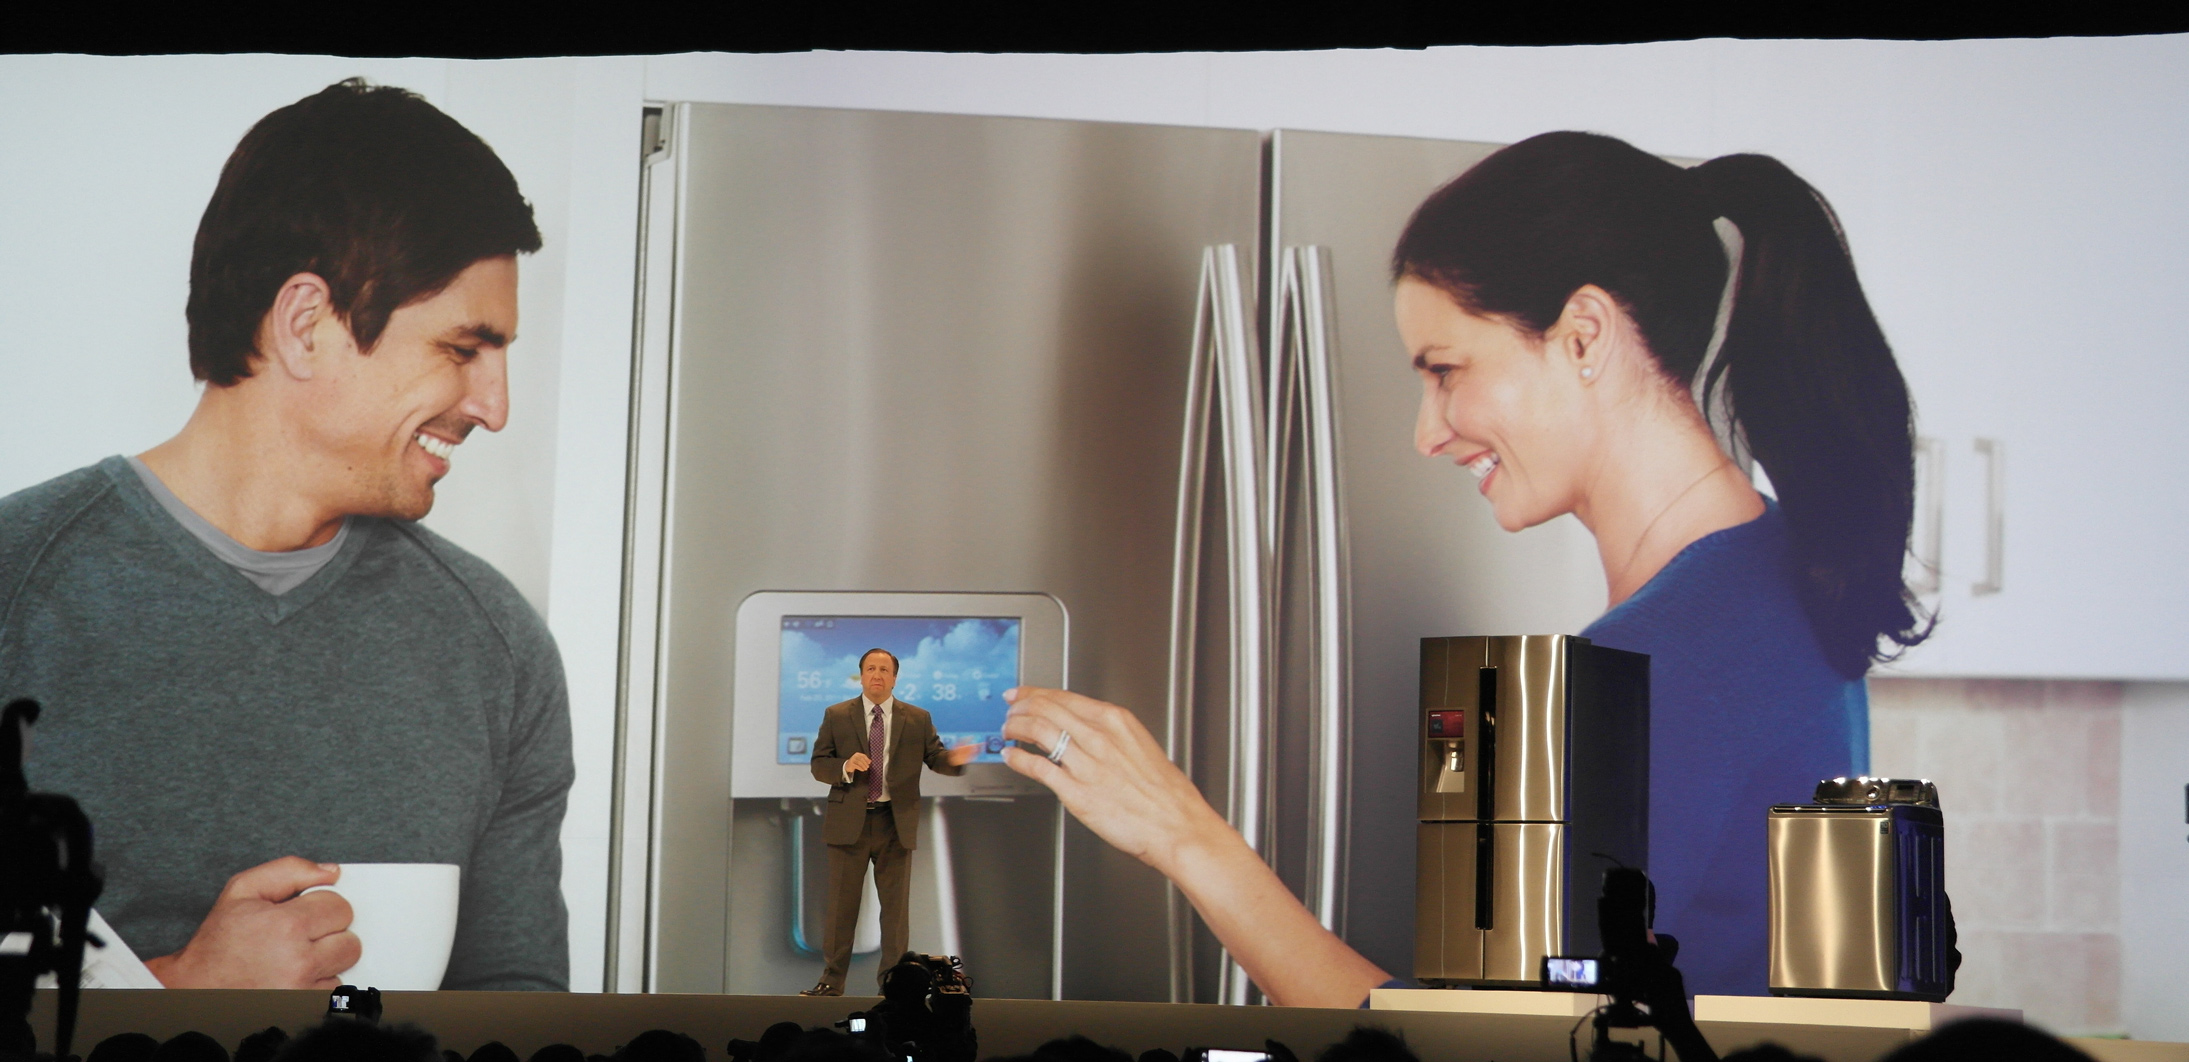 Samsung Aiming to be Number One in Home Appliances